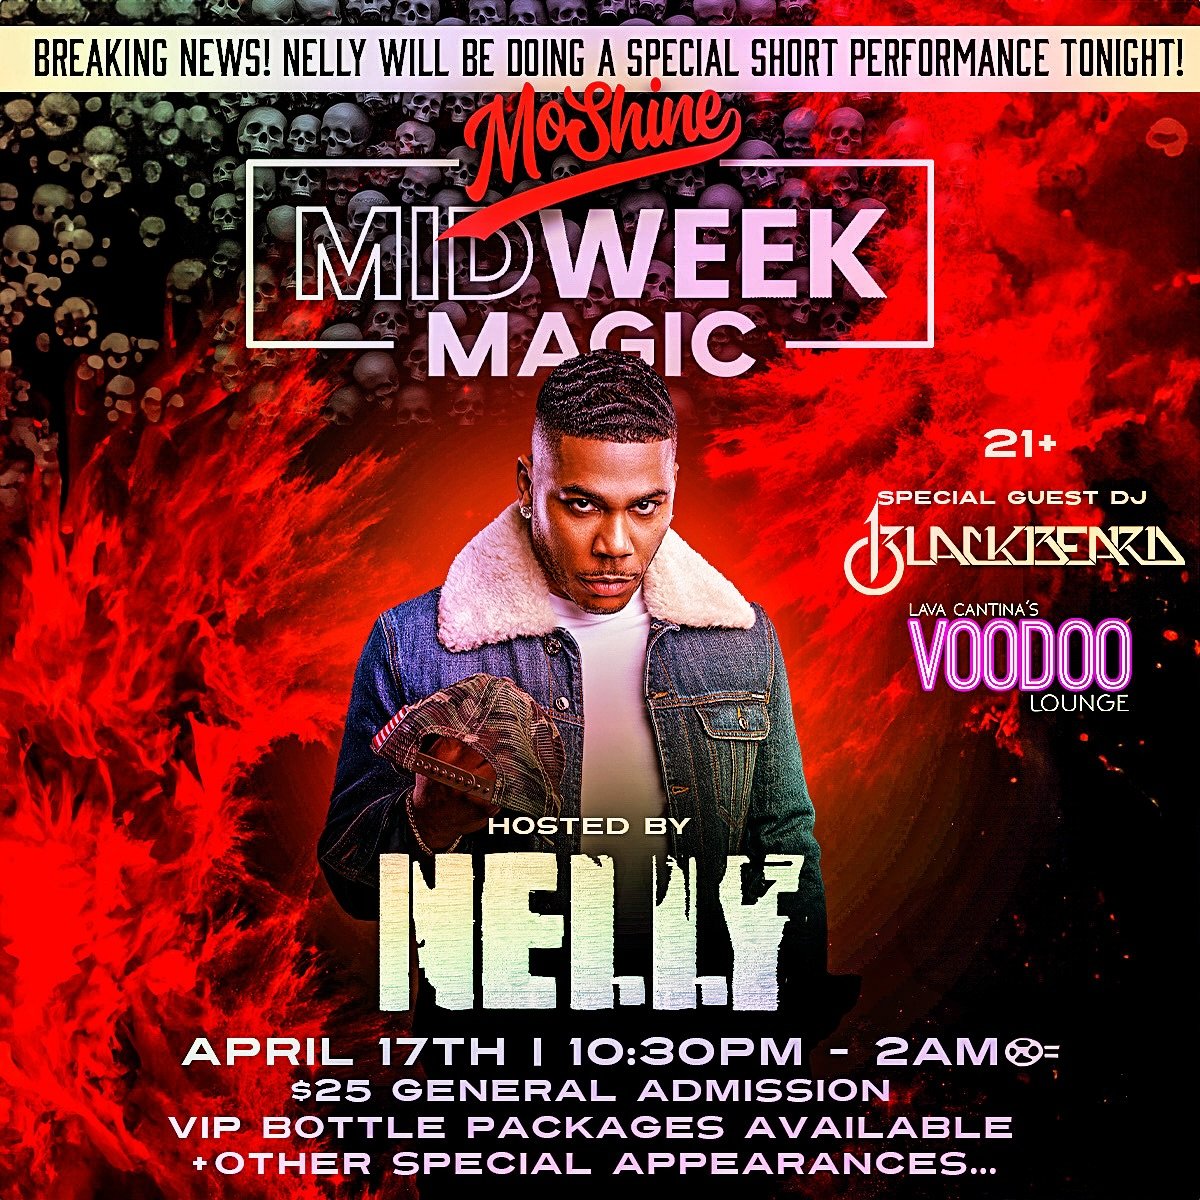 🚨 THIS JUST IN!!! Nelly will be doing a special short performance TONIGHT @lavacantinatc 🚨

🔥 Get ready for an EPIC NIGHT -  MoShine Midweek Magic HOSTED by the legend himself, Nelly!! - April 17th &bull; 10:30 PM 🔥

😈 Part of the SERVICE INDUST